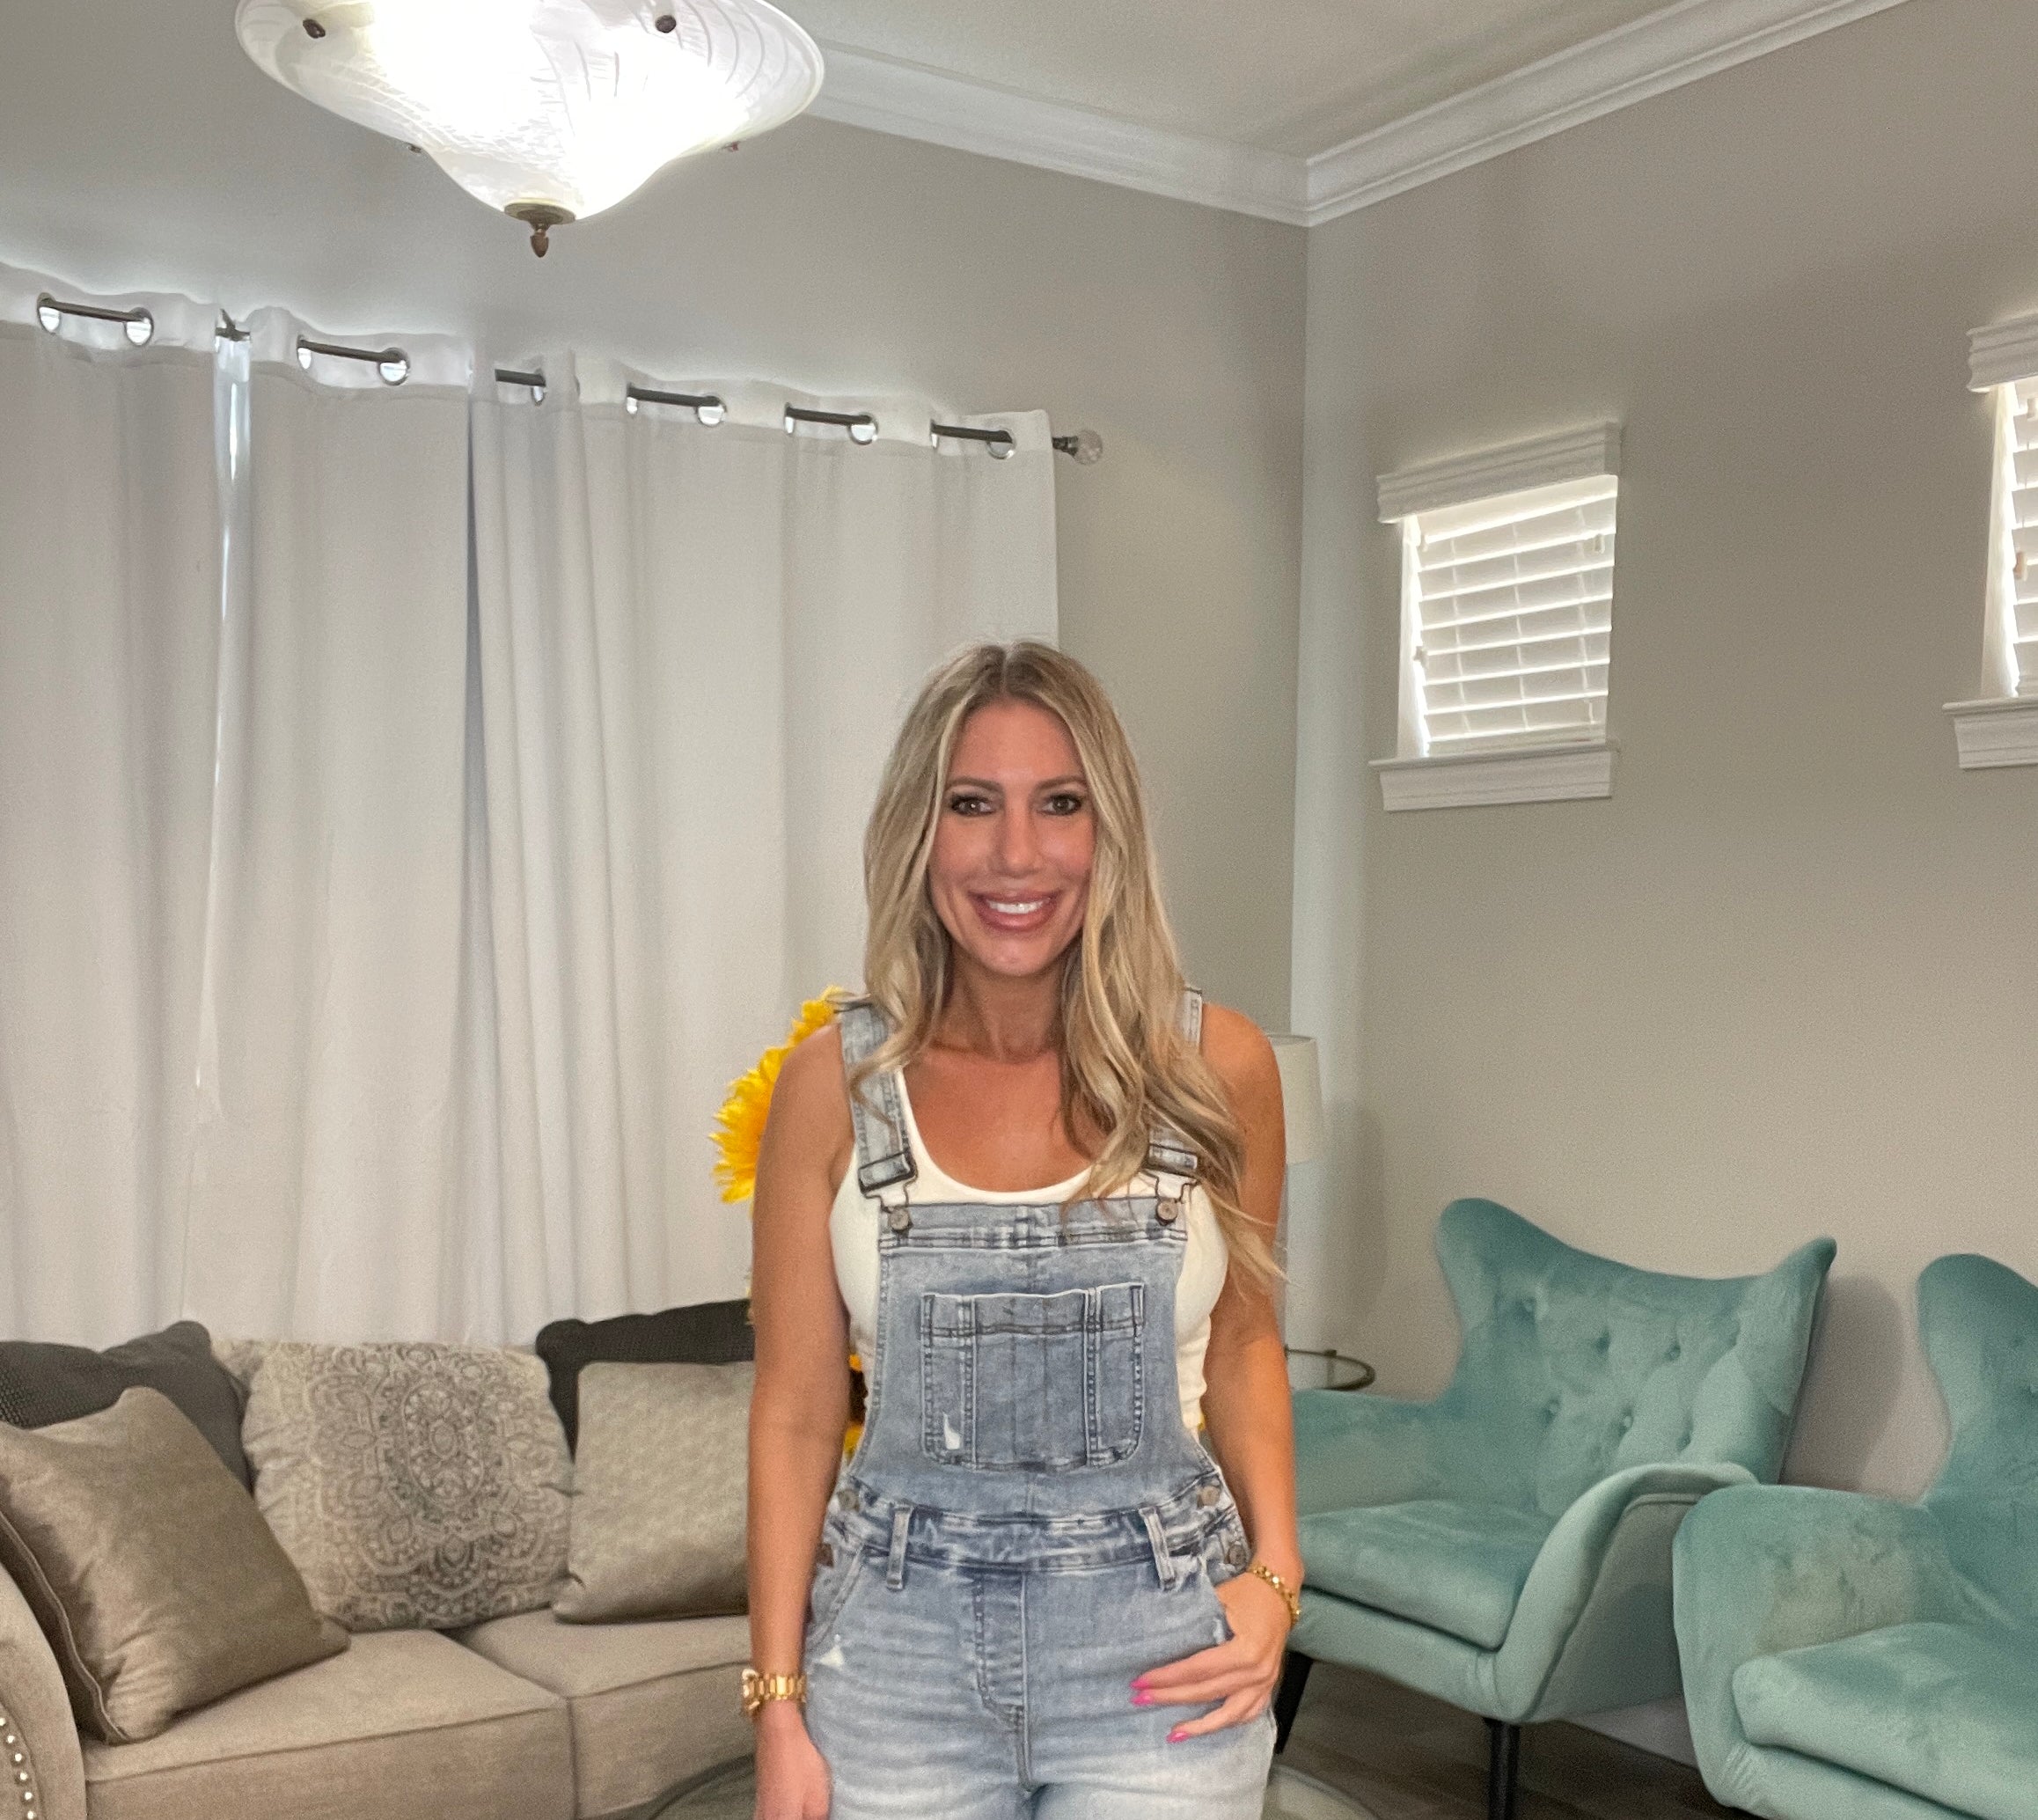 Judy Blue Light Wash Overall Shorts-200 Jeans- Simply Simpson's Boutique is a Women's Online Fashion Boutique Located in Jupiter, Florida